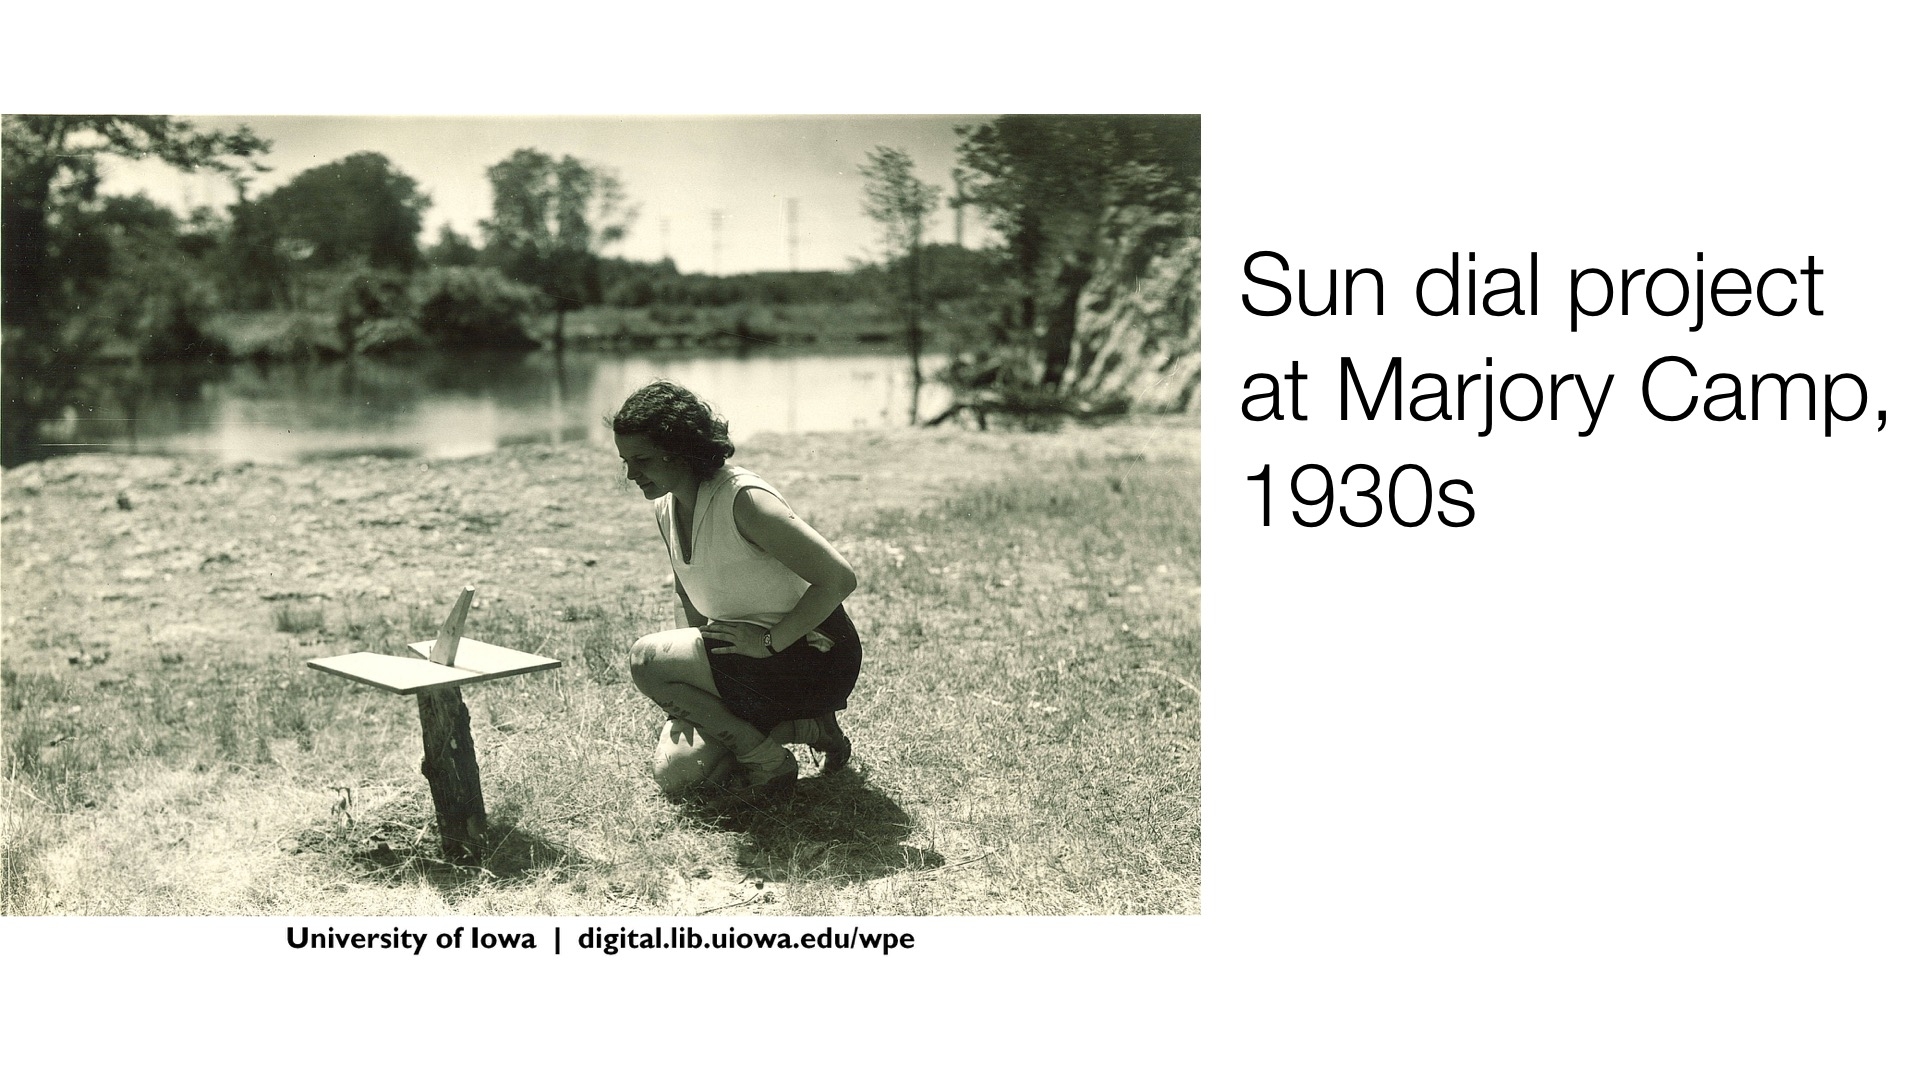 Sun dial project at Marjory Camp, 1930s